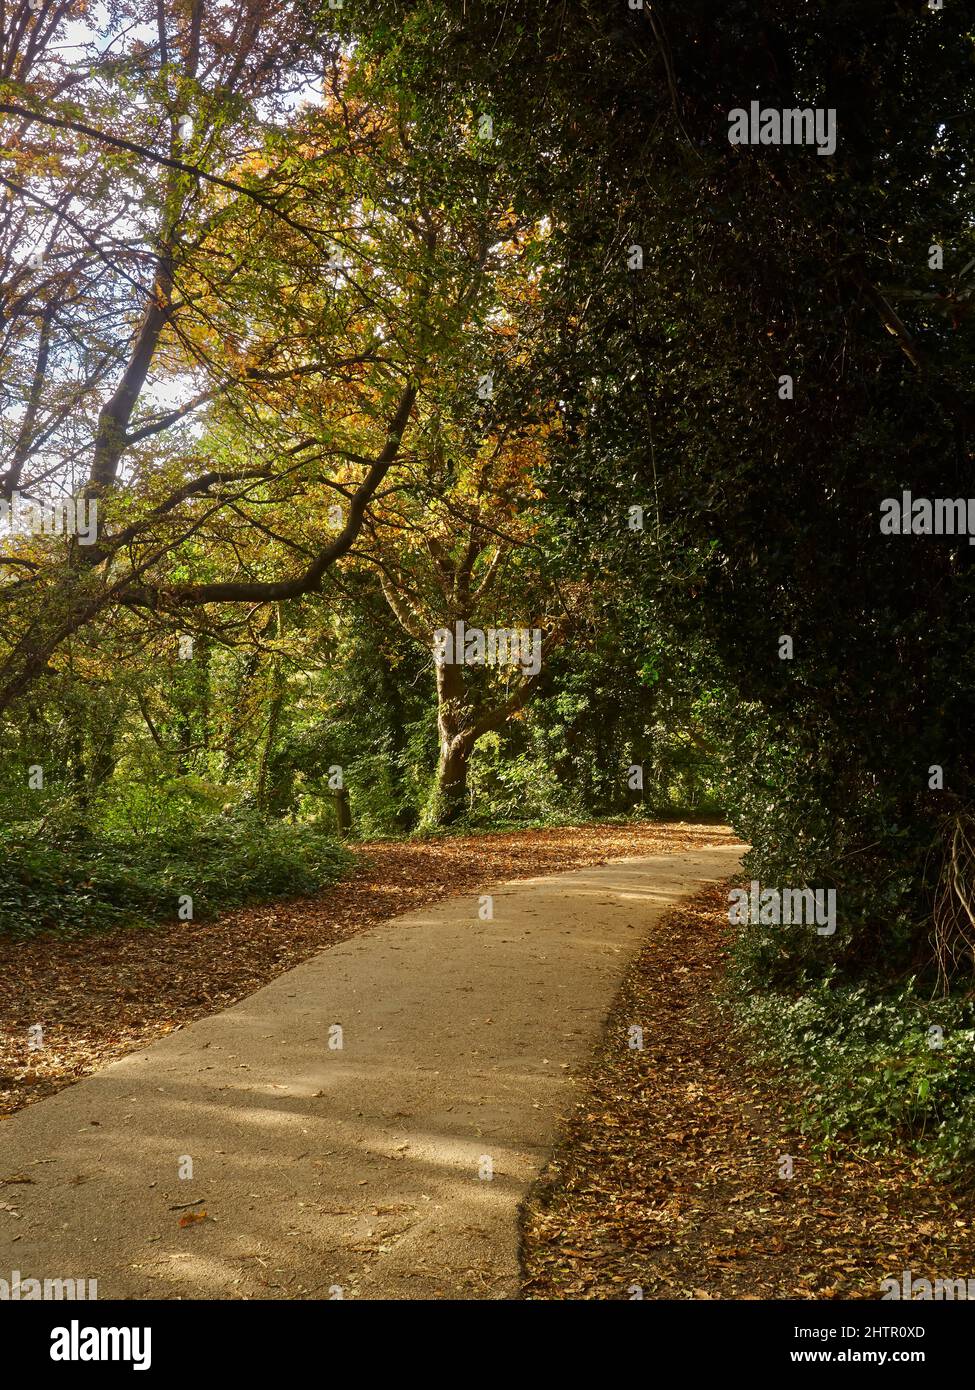 A dappled, tree-lined path through Hampstead Heath, leading off to the distance and inviting one forward through the autumn-touched greenery. Stock Photo